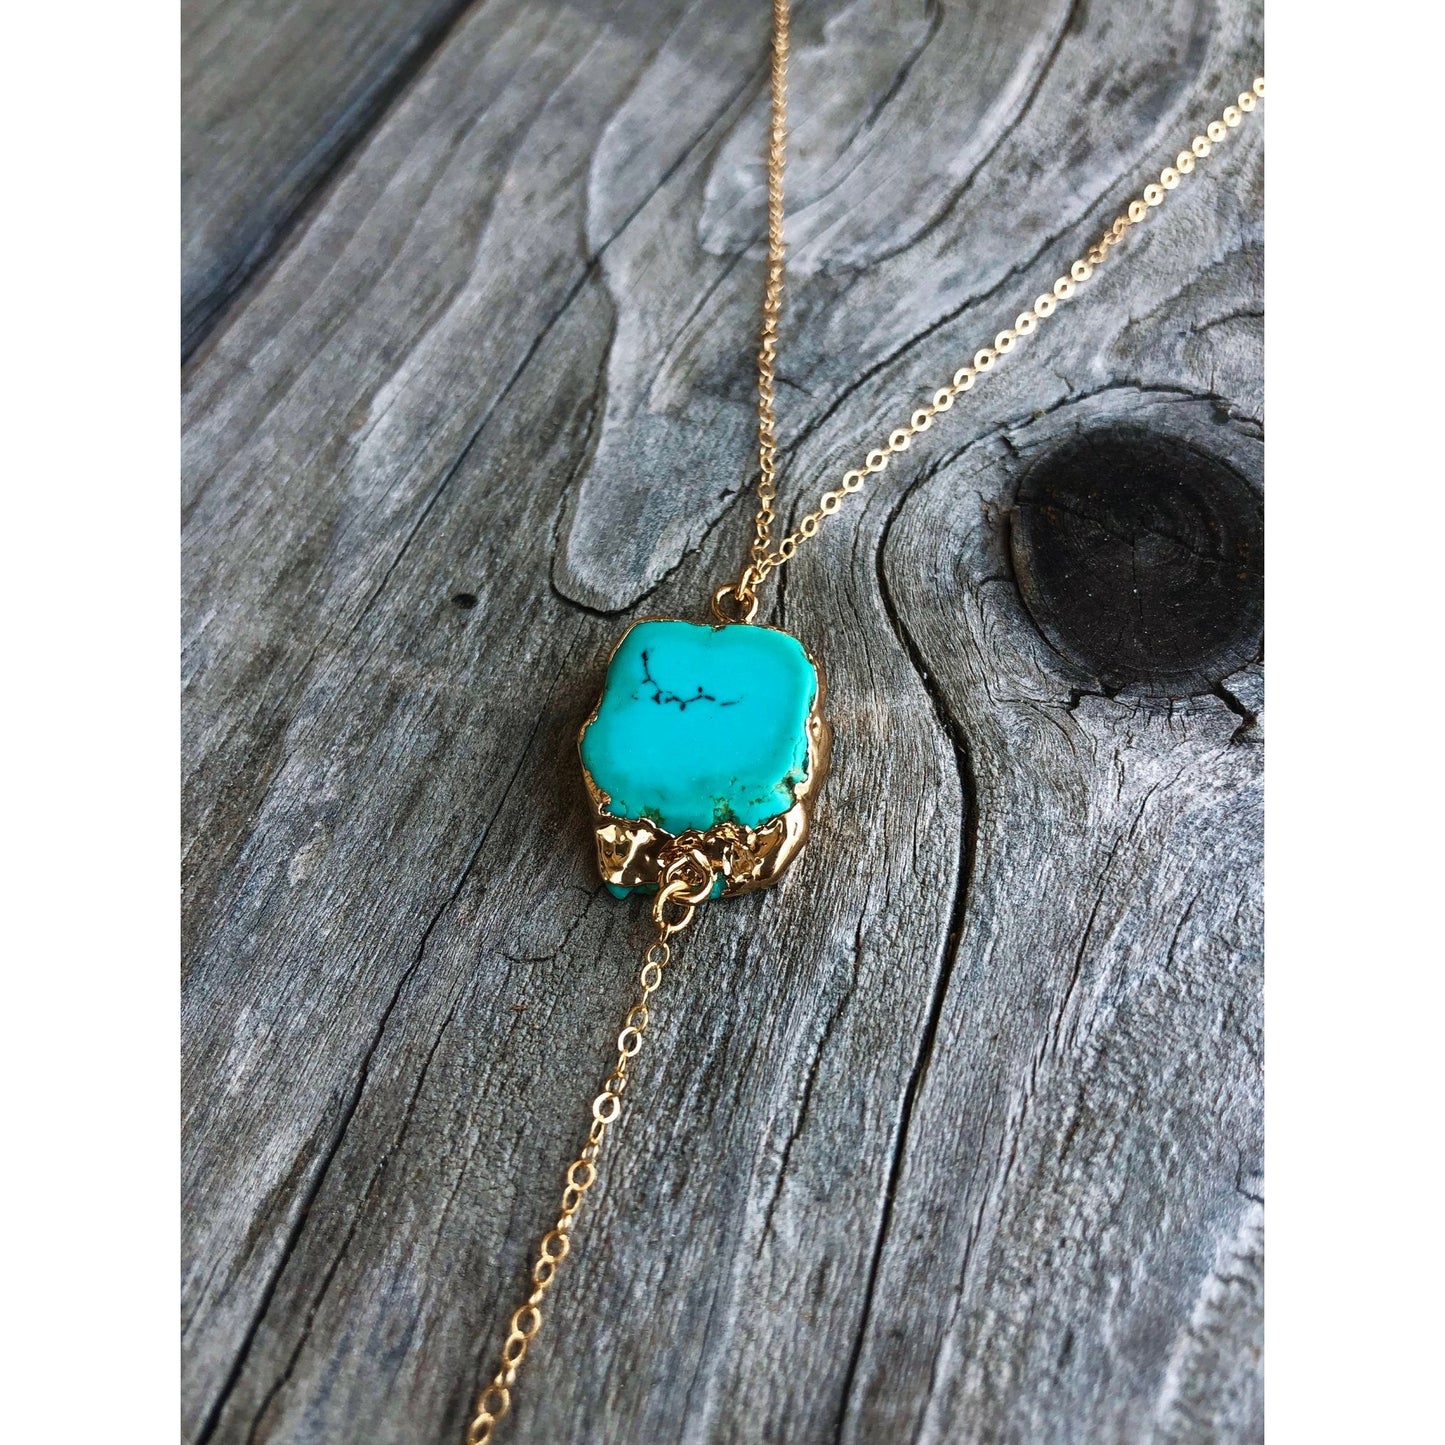 Serendipity Turquoise Lariat by Toasted Jewelry